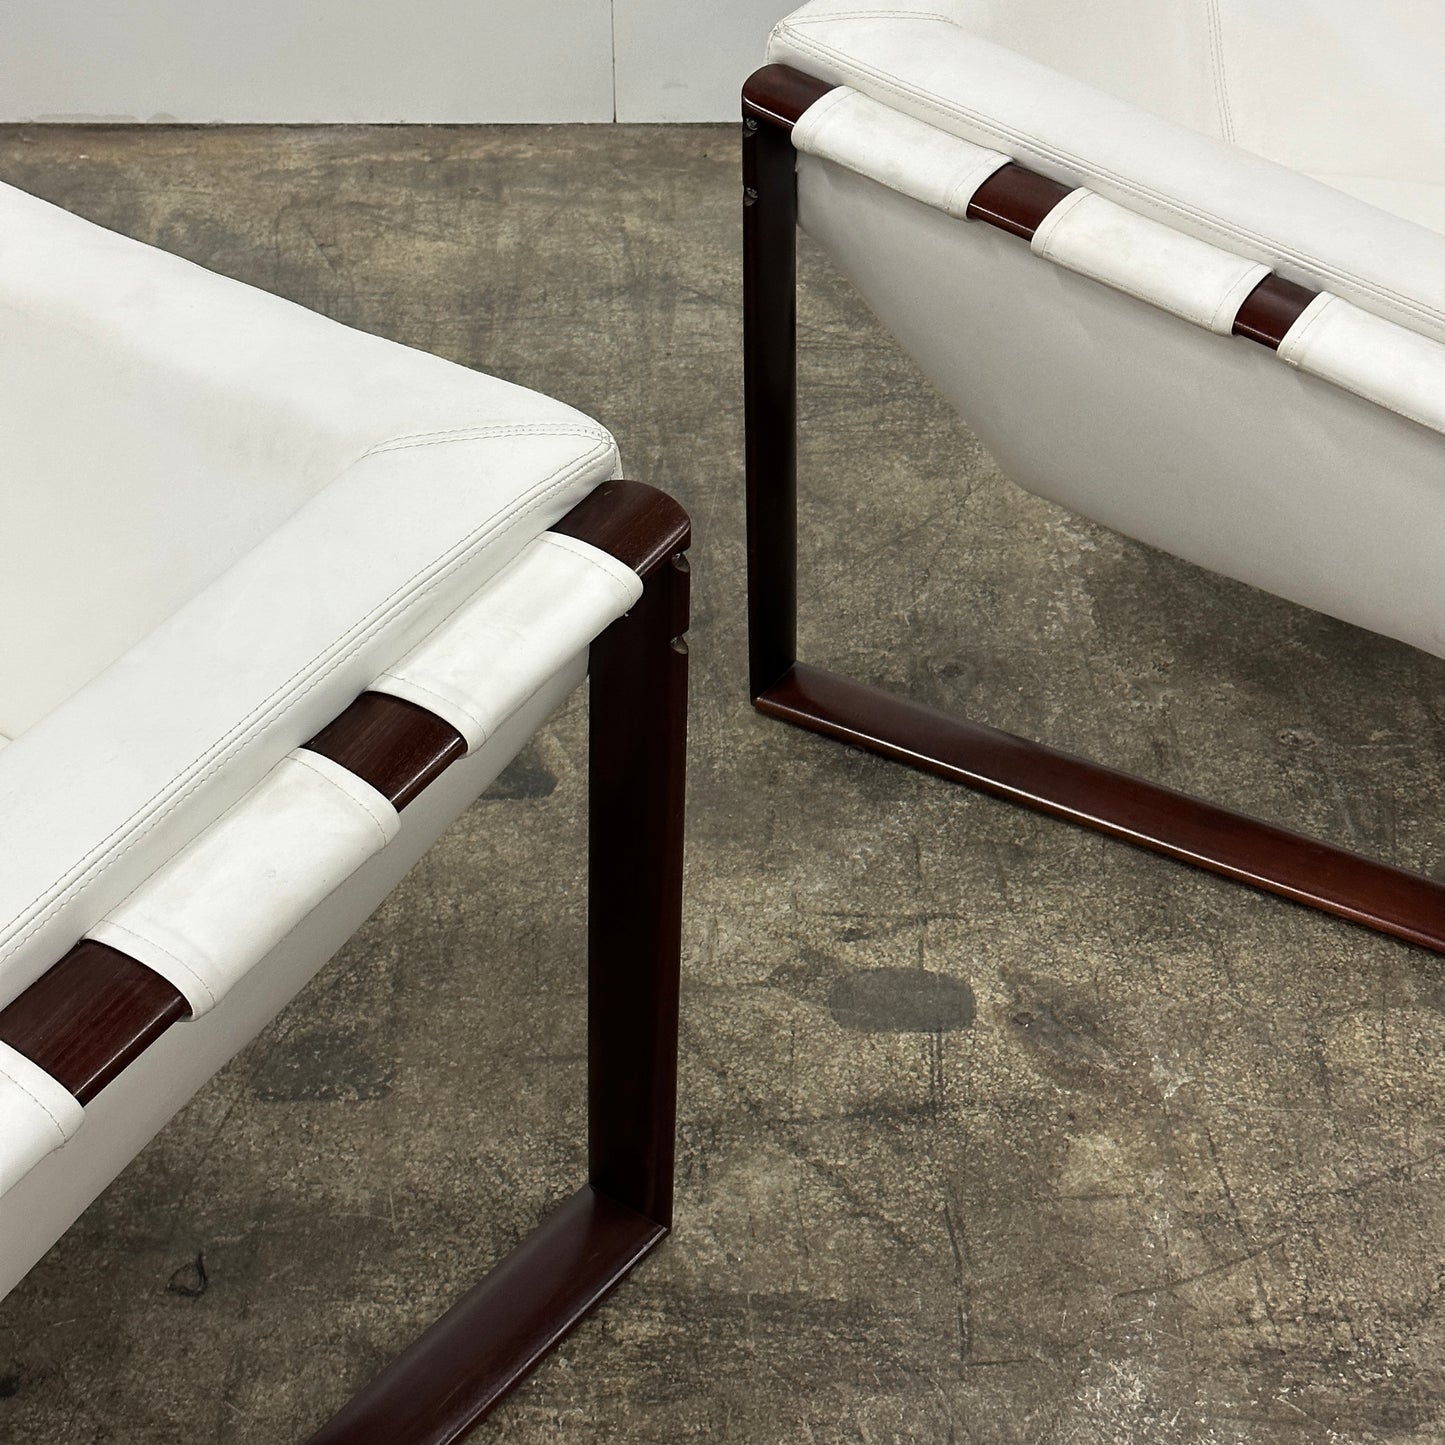 Brazilian Rosewood Lounge Chairs by Percival Lafer